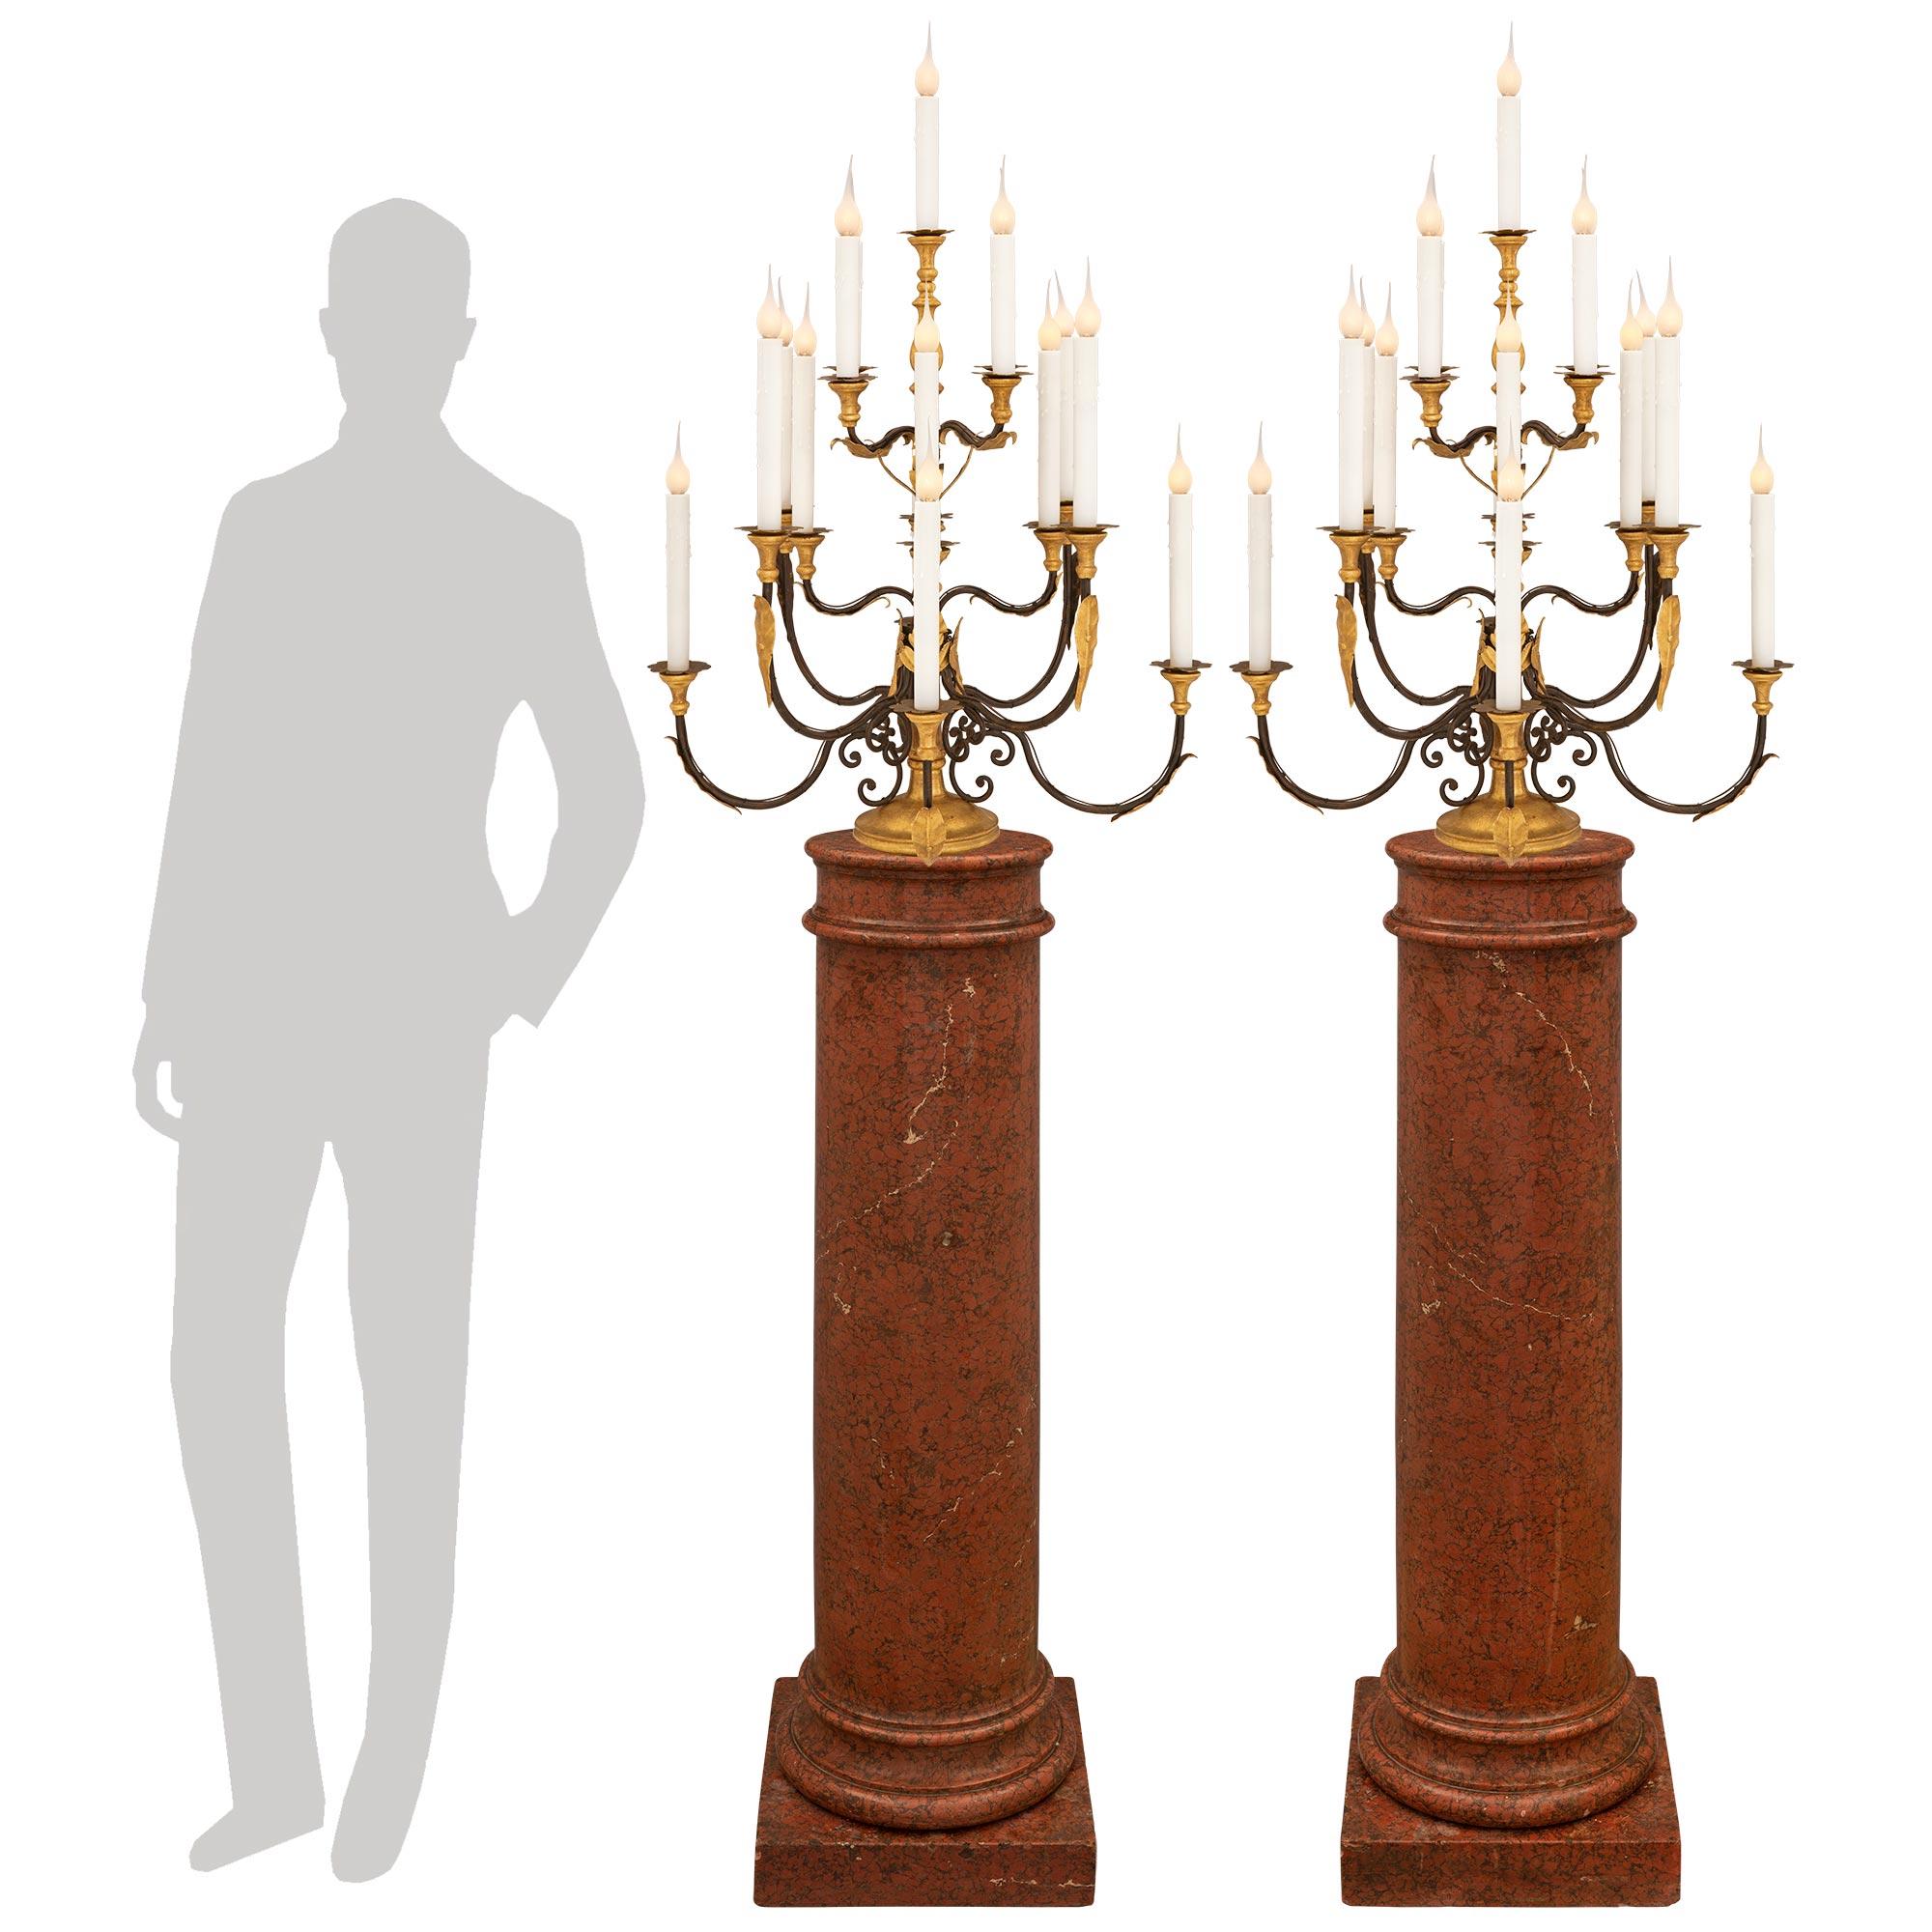 A beautiful pair of Italian 18th century Baroque st. wrought iron, giltwood and pressed gilt metal candelabra lamps. Each seventeen arm lamp is raised by an elegant circular giltwood base with a fine wrap around mottled border. Each of the wrought